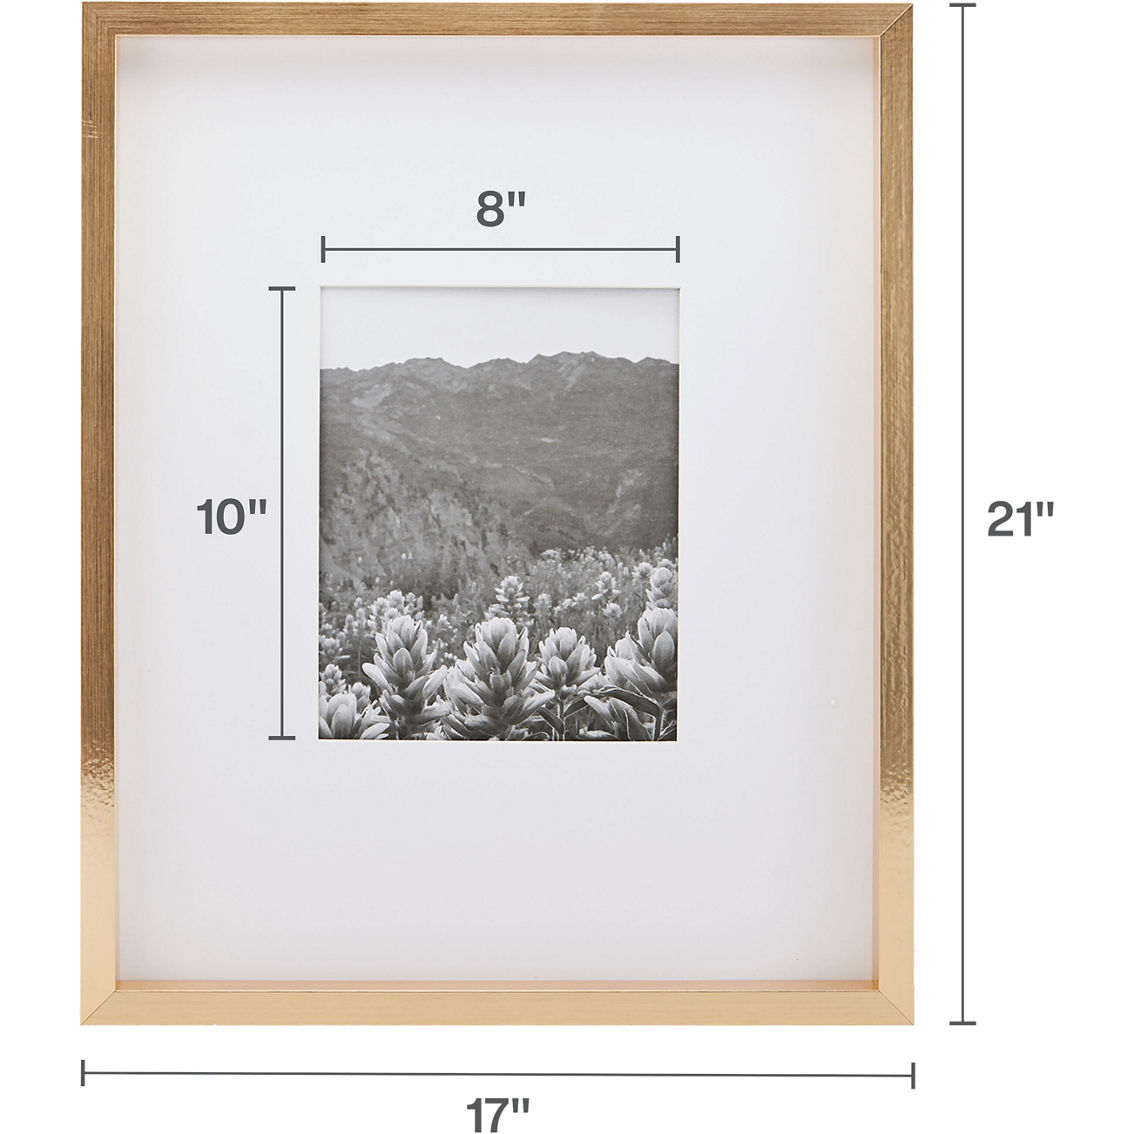 Mikasa Home 8x10 / 16x20 Gold Gallery Frame - Image 2 of 6